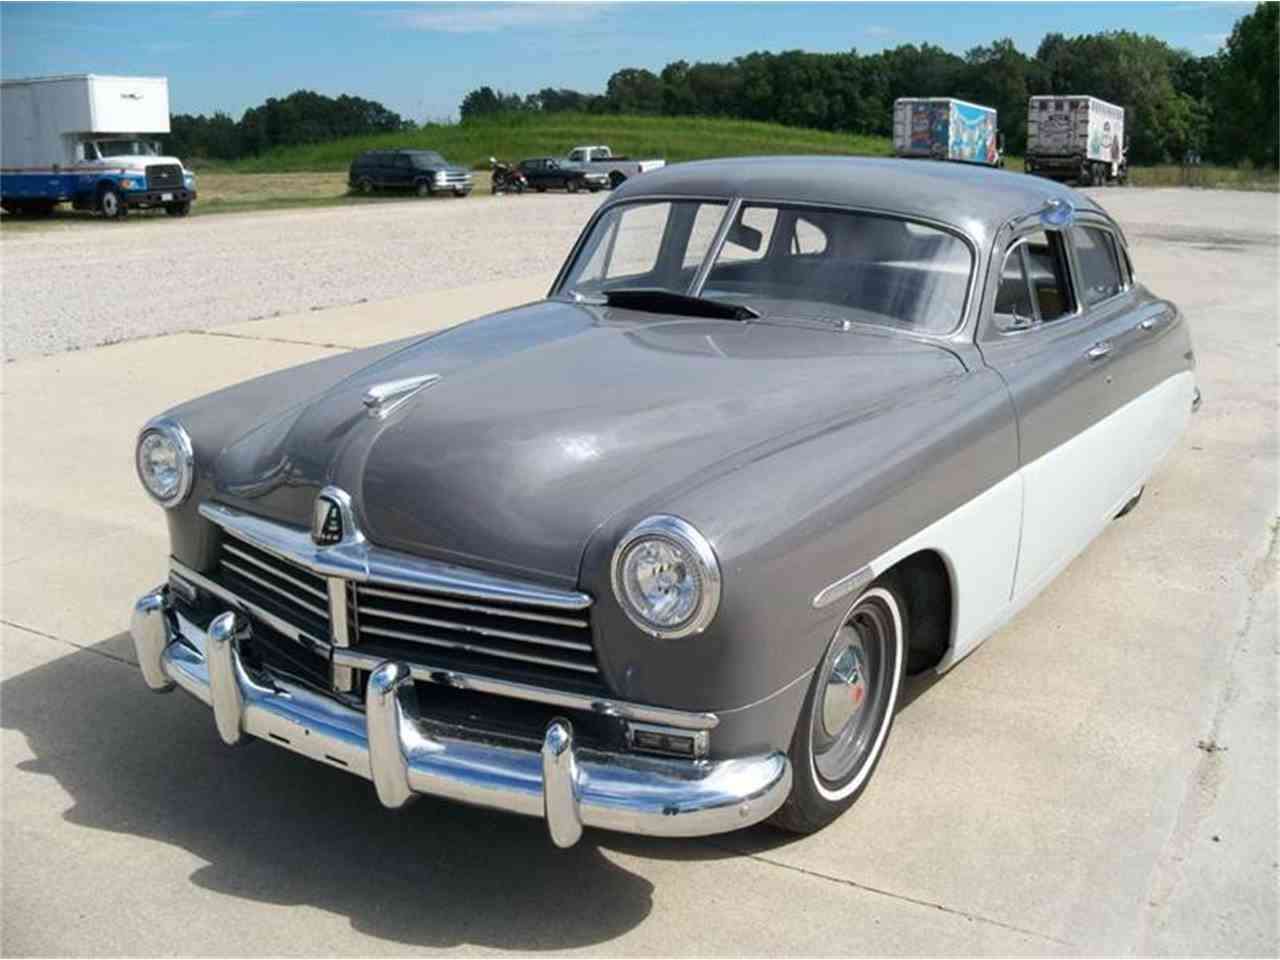 The 1949 Hudson Super 6 was another step toward the true American muscle car. | ClassicCars.com photo